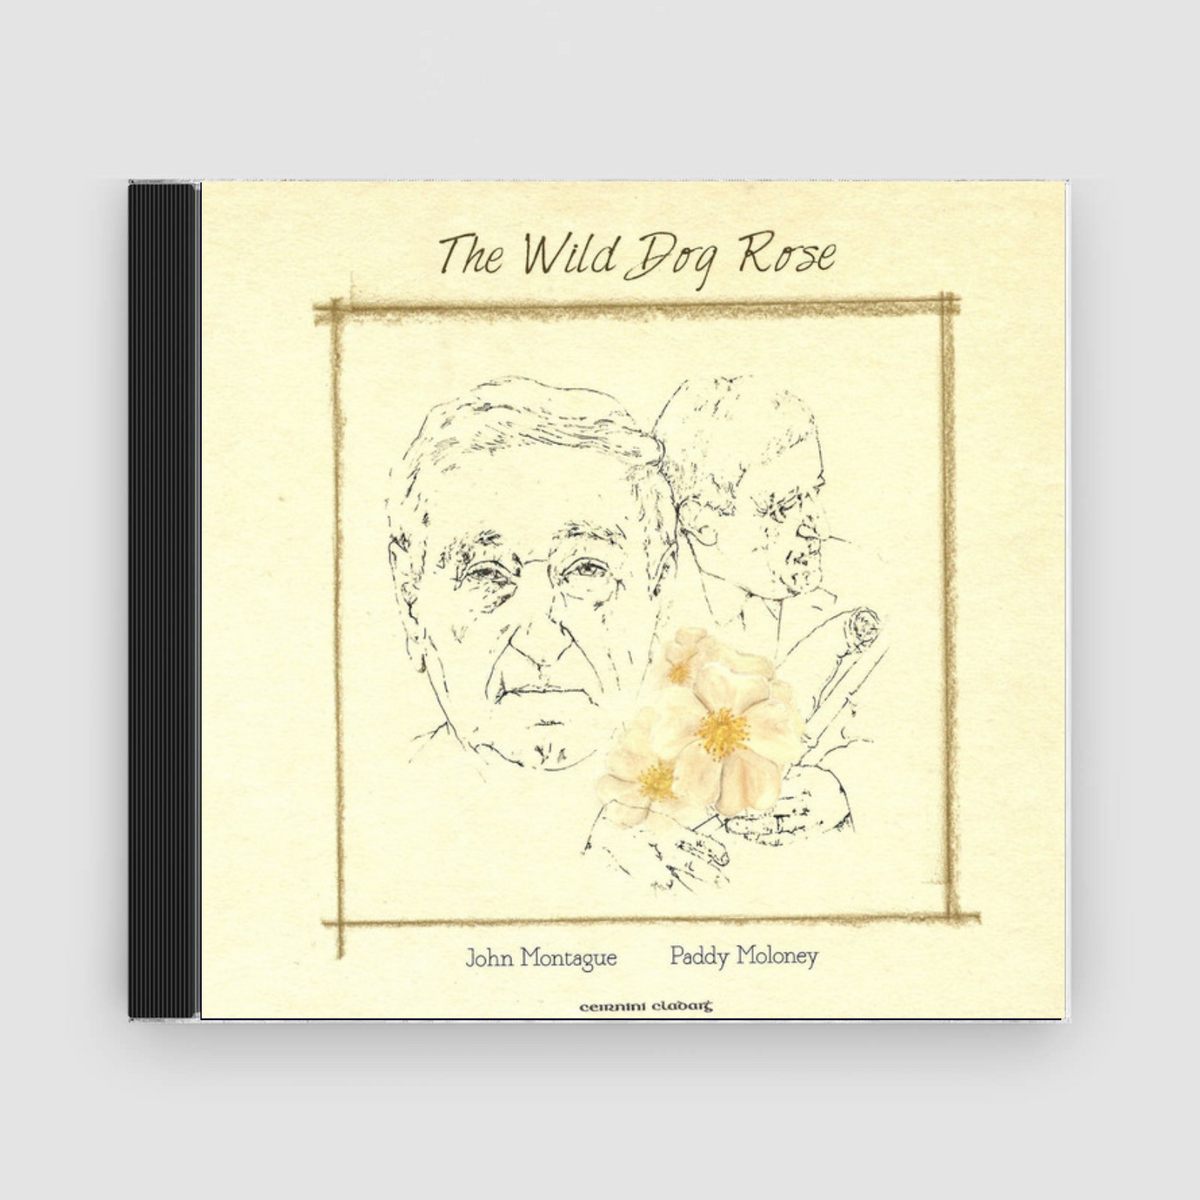 John Montague and Paddy Moloney : The Wild Dog Rose